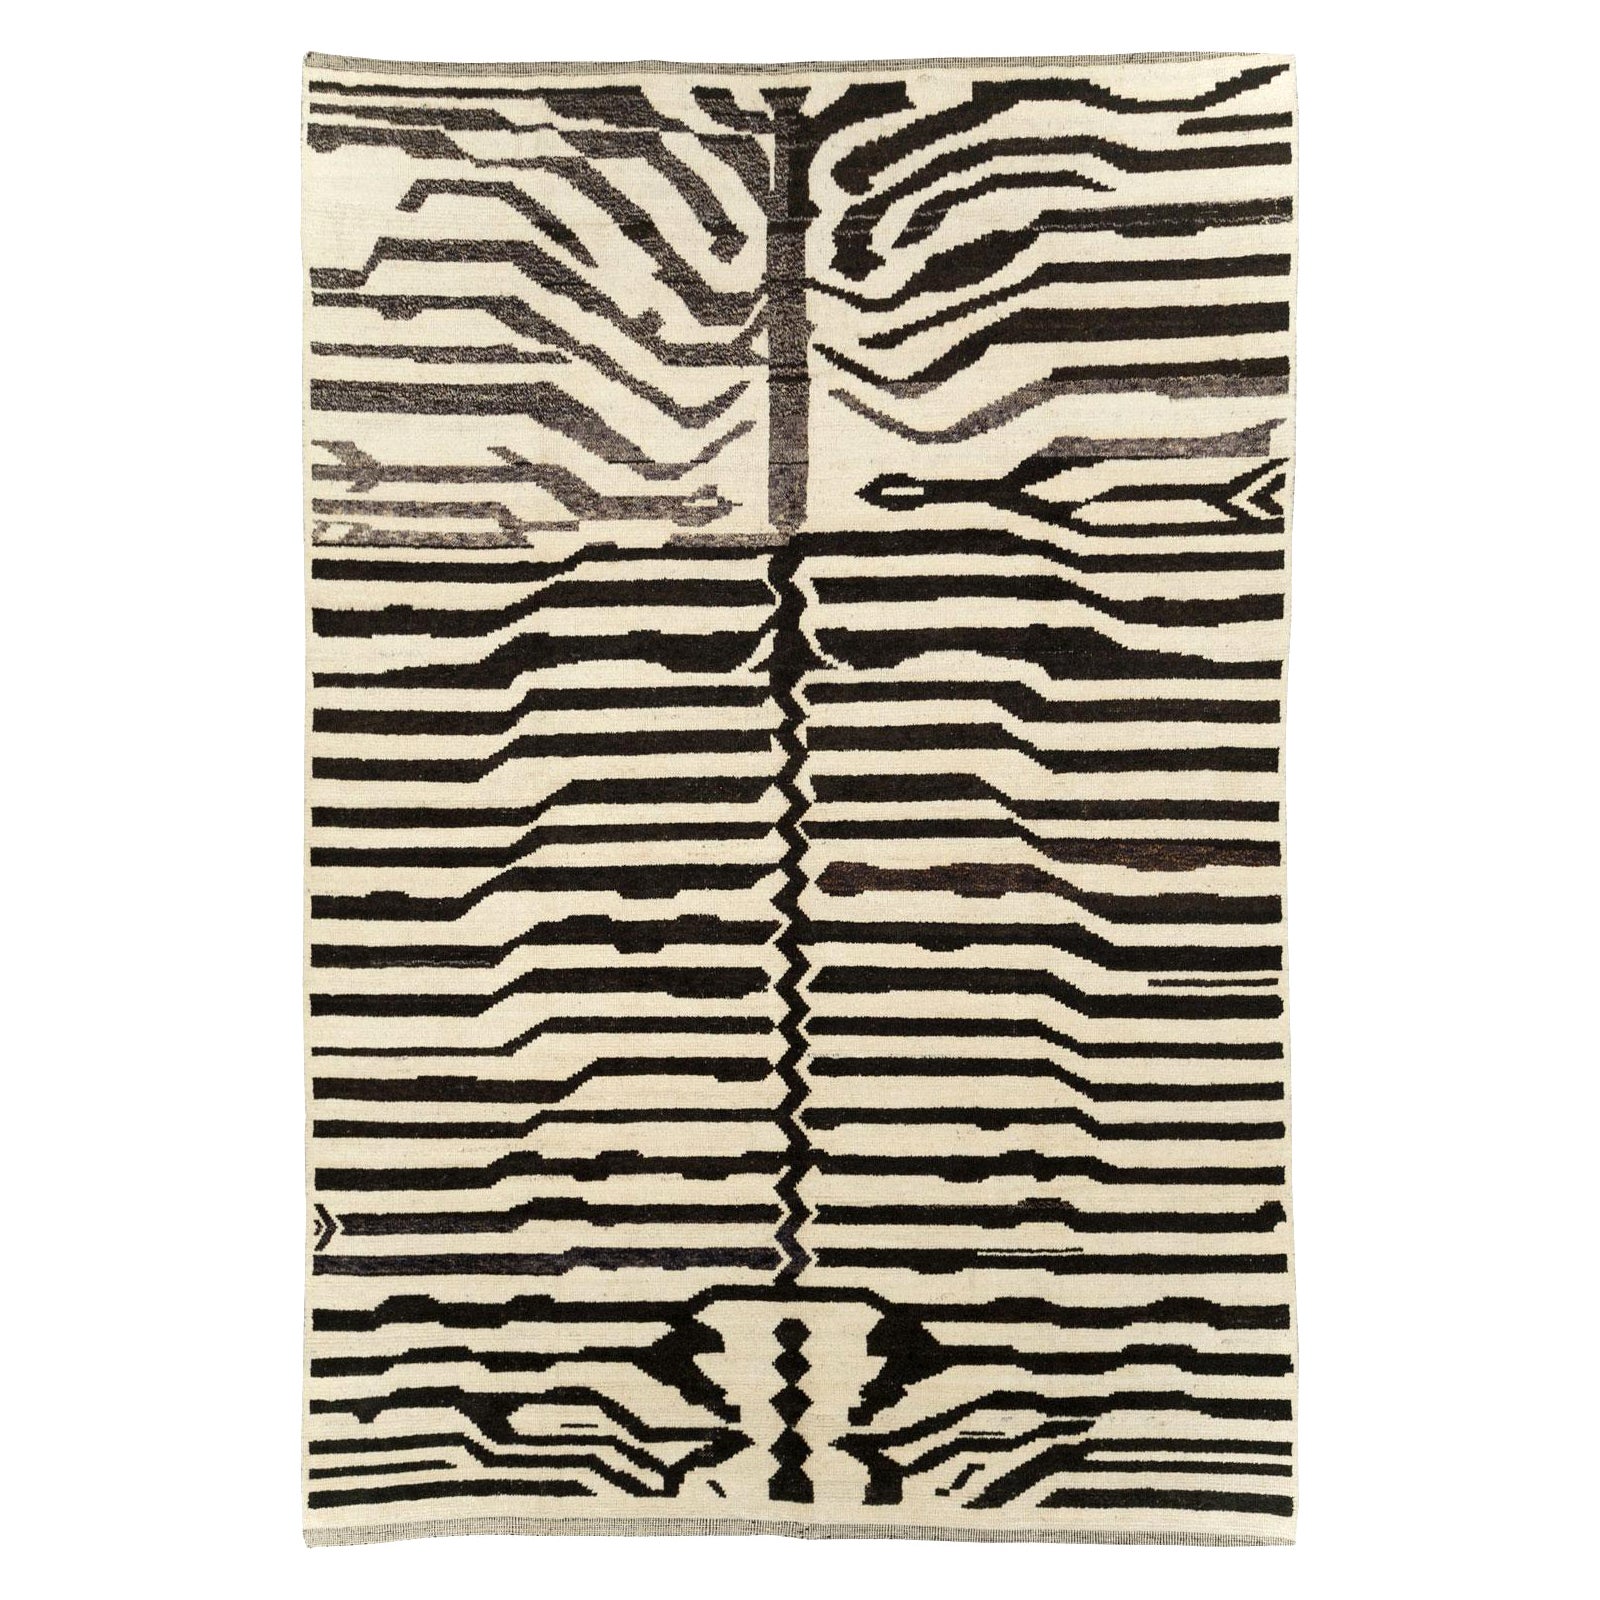 Galerie Shabab Collection New Handmade Turkish Zebra Print Room Size Carpet For Sale